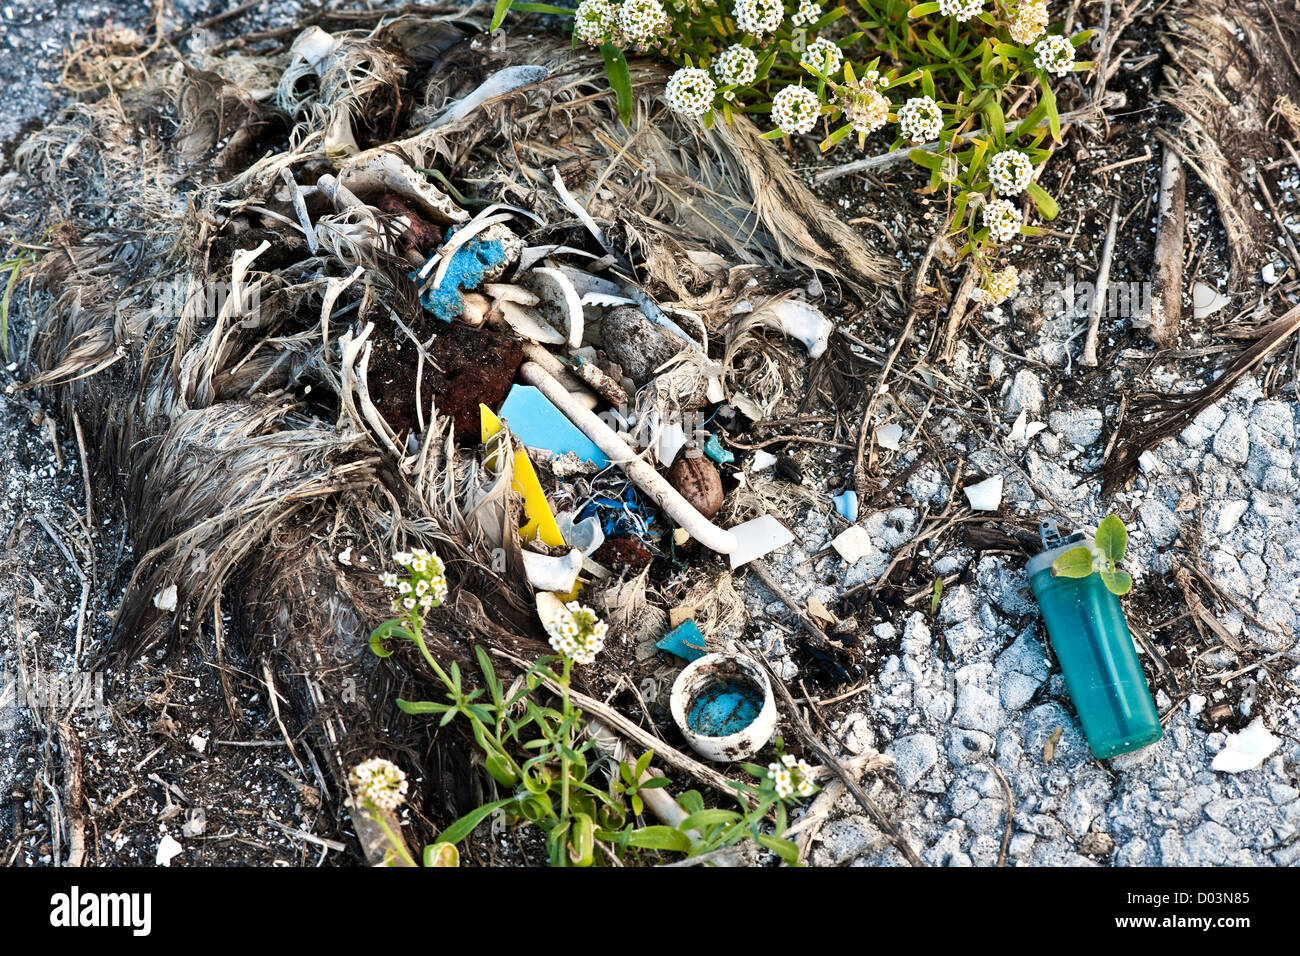 A Black-footed Albatross (Phoebastria albatrus, endangered) dead from the ingestion of too much plastic debris. Archipelago. Stock Photo